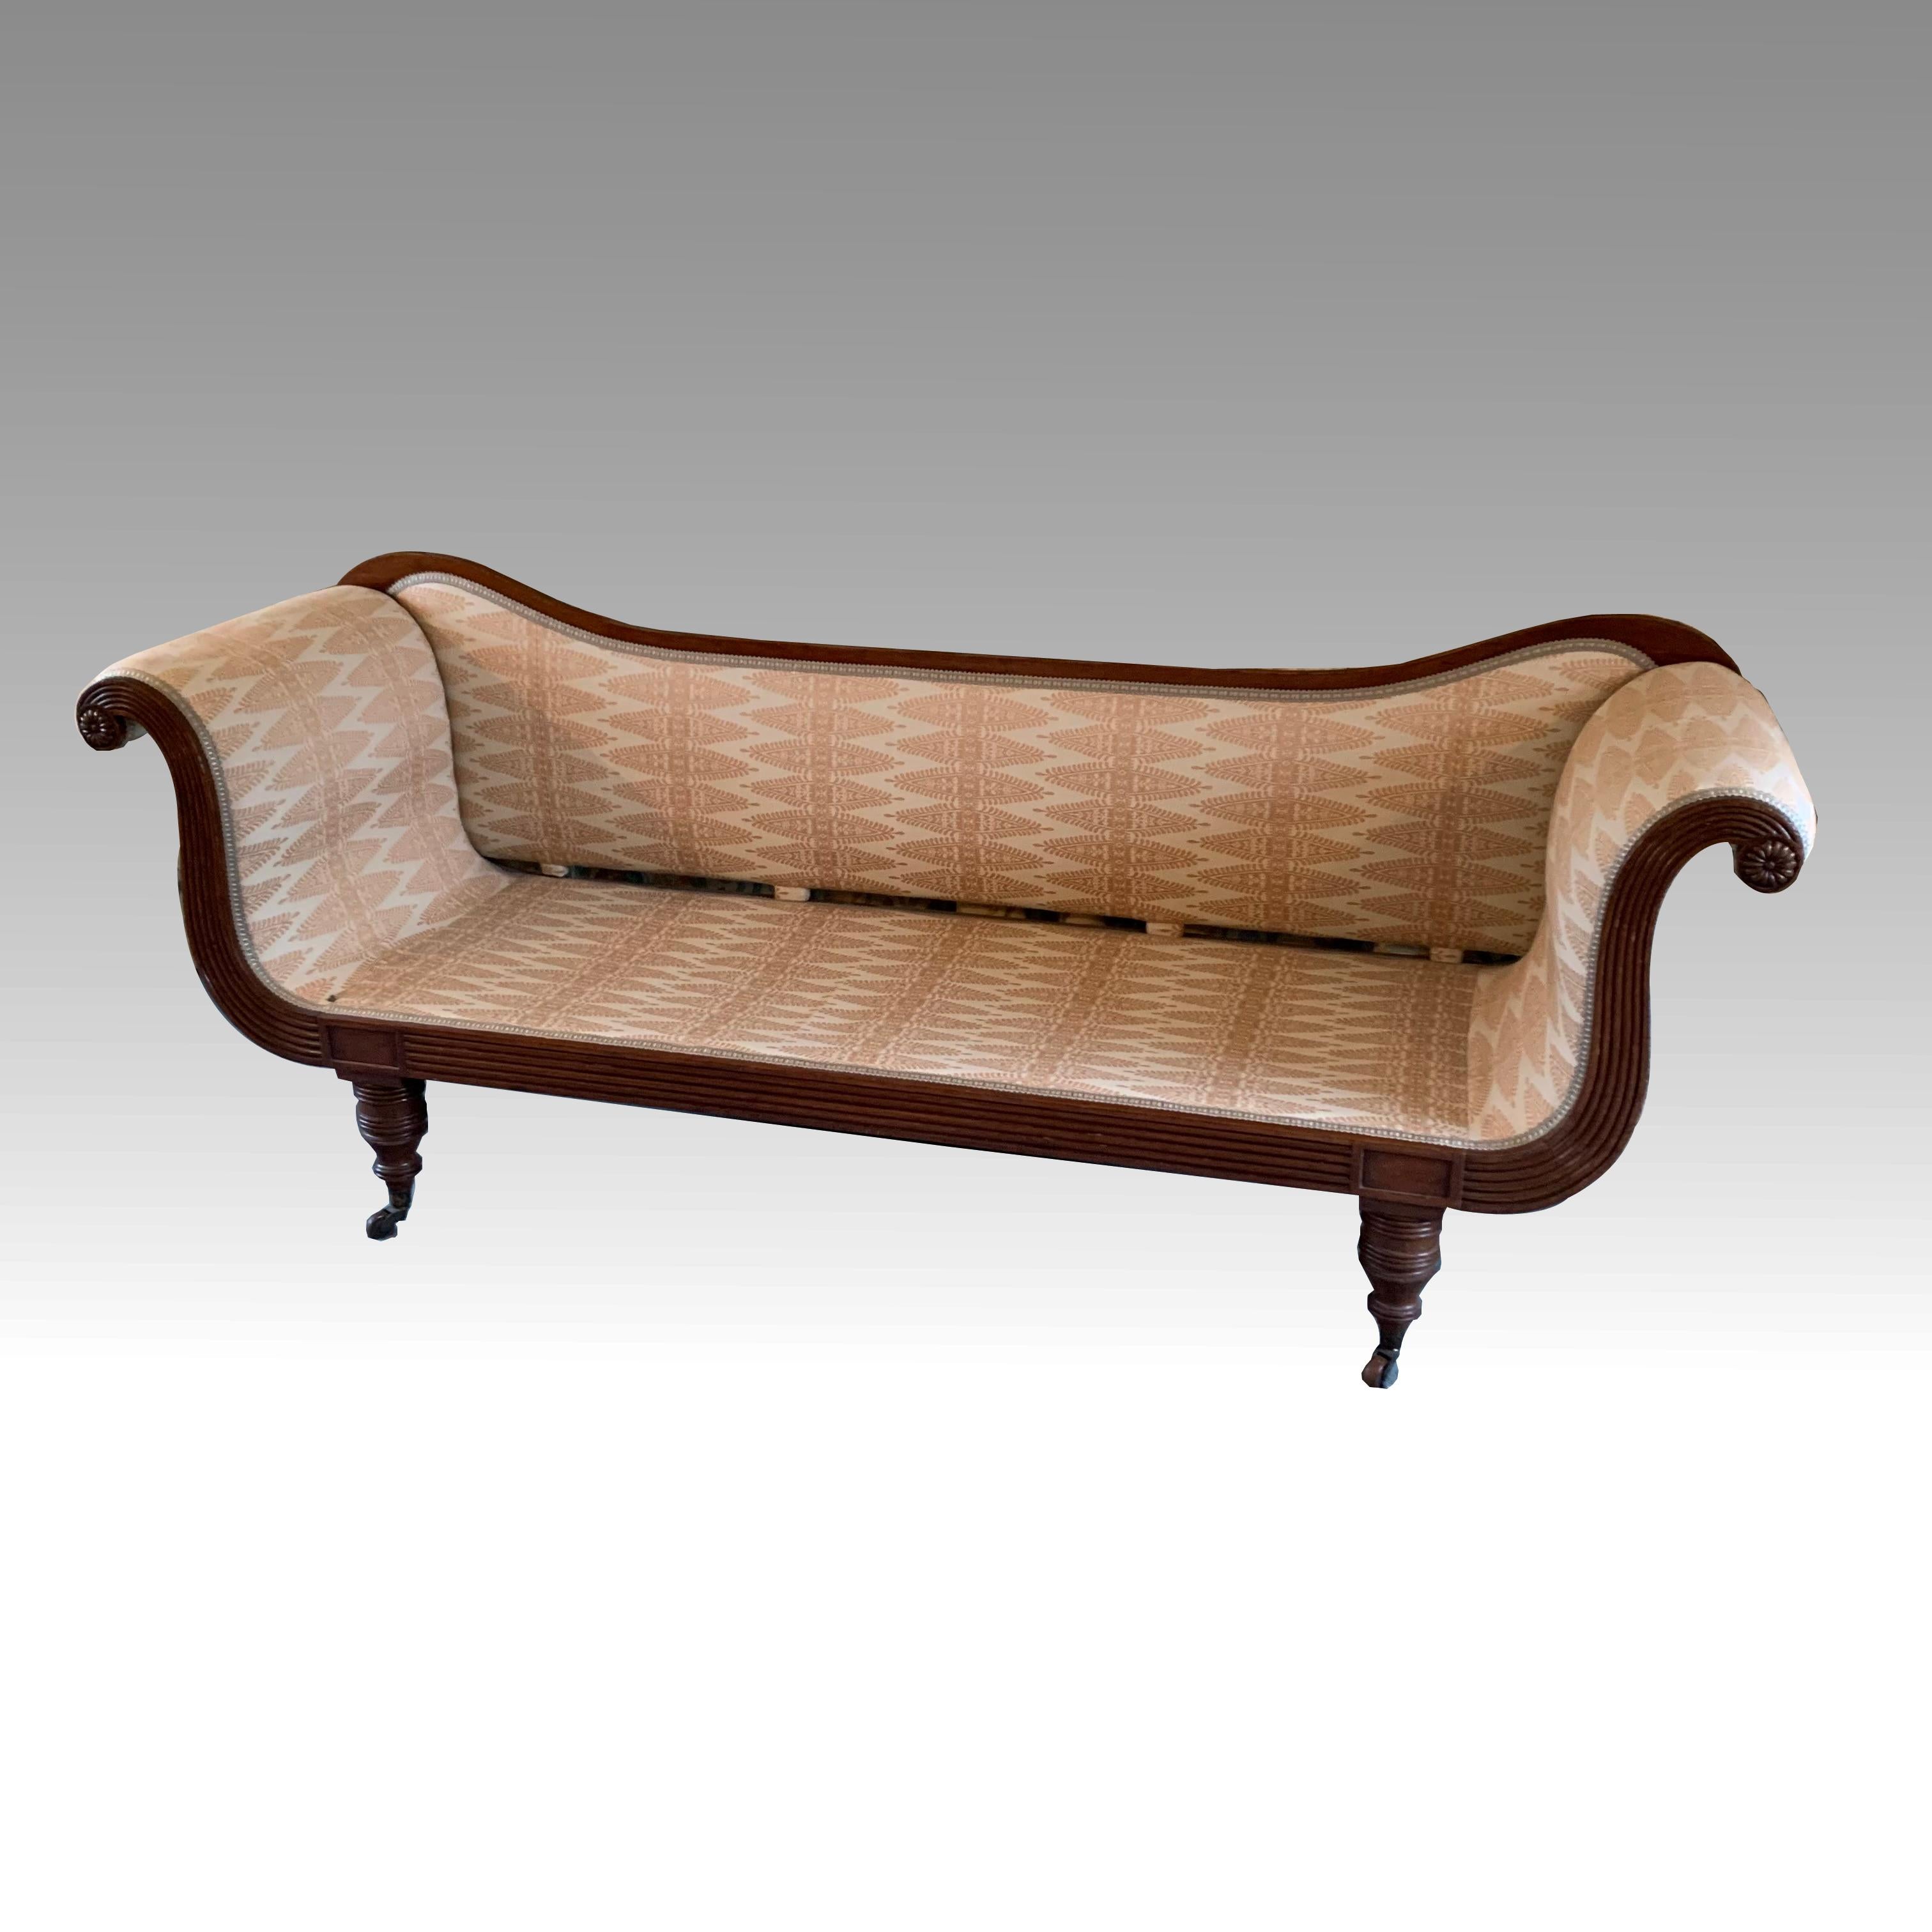 fine quality Regency scroll end settee with carved and reeded frame. A stylish and comfortable sofa in good origional condition. 
Upholstery is beige on white and although not new, is is clean and usable, or could be recovered in a fabric of your